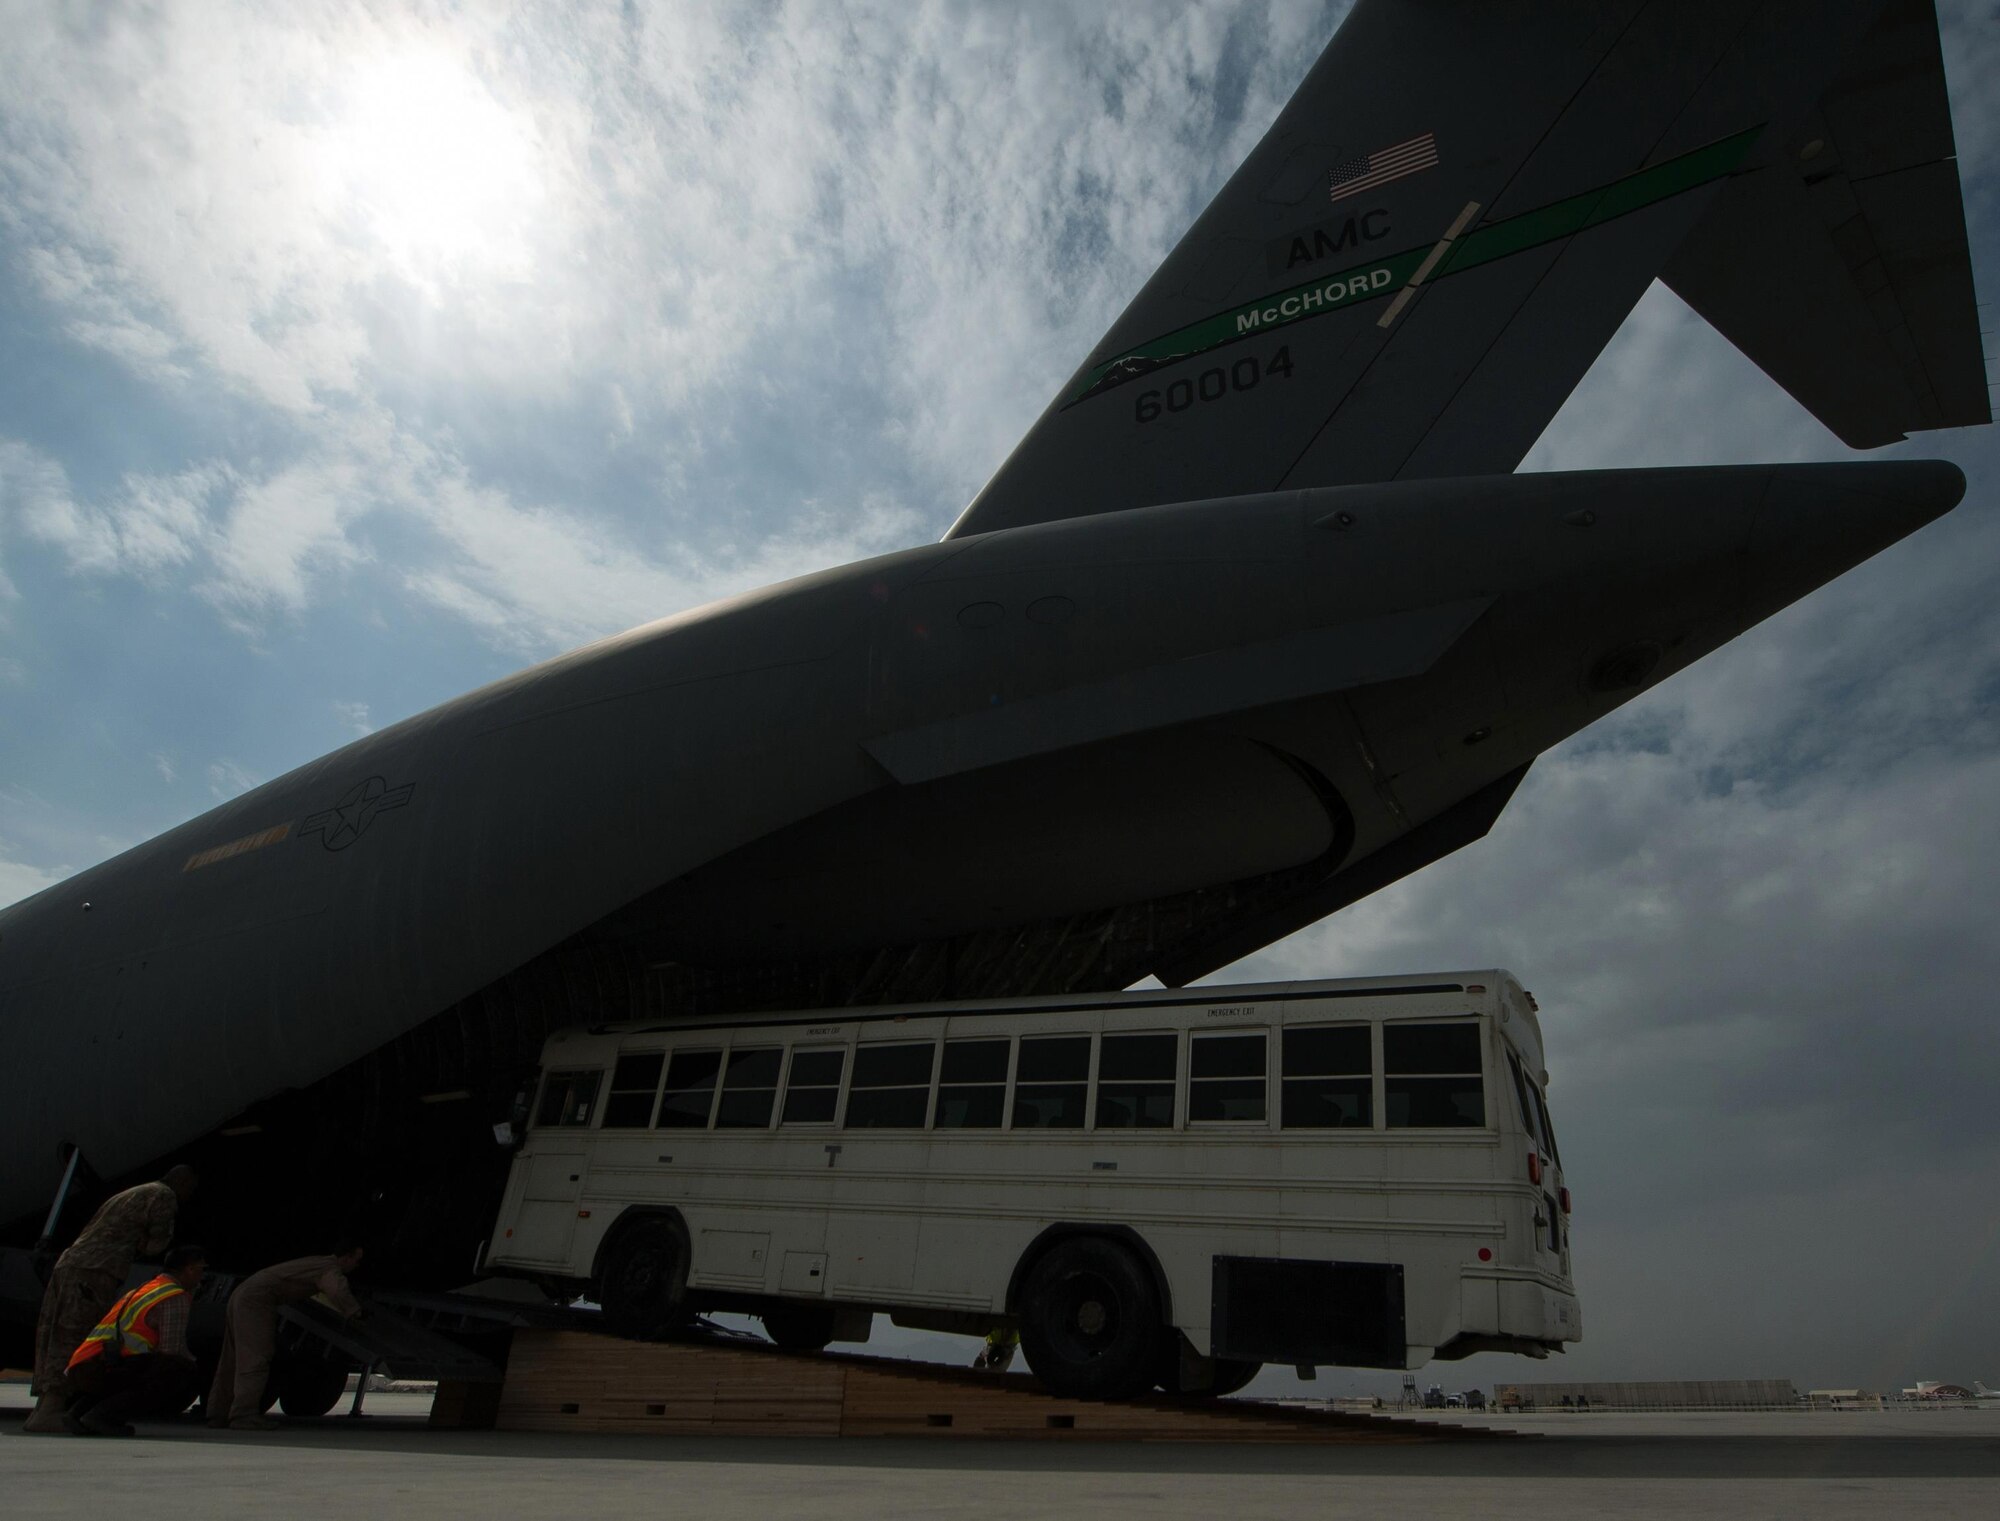 A bus is loaded onto an U.S. Air Force C-17 Globemaster III aircraft at Bagram Airfield, Afghanistan, Sept. 21, 2015. USAF cargo aircraft have transported 31,500 short tons of cargo throughout Afghanistan this year (U.S. Air Force photo by Tech. Sgt. Joseph Swafford/Released)